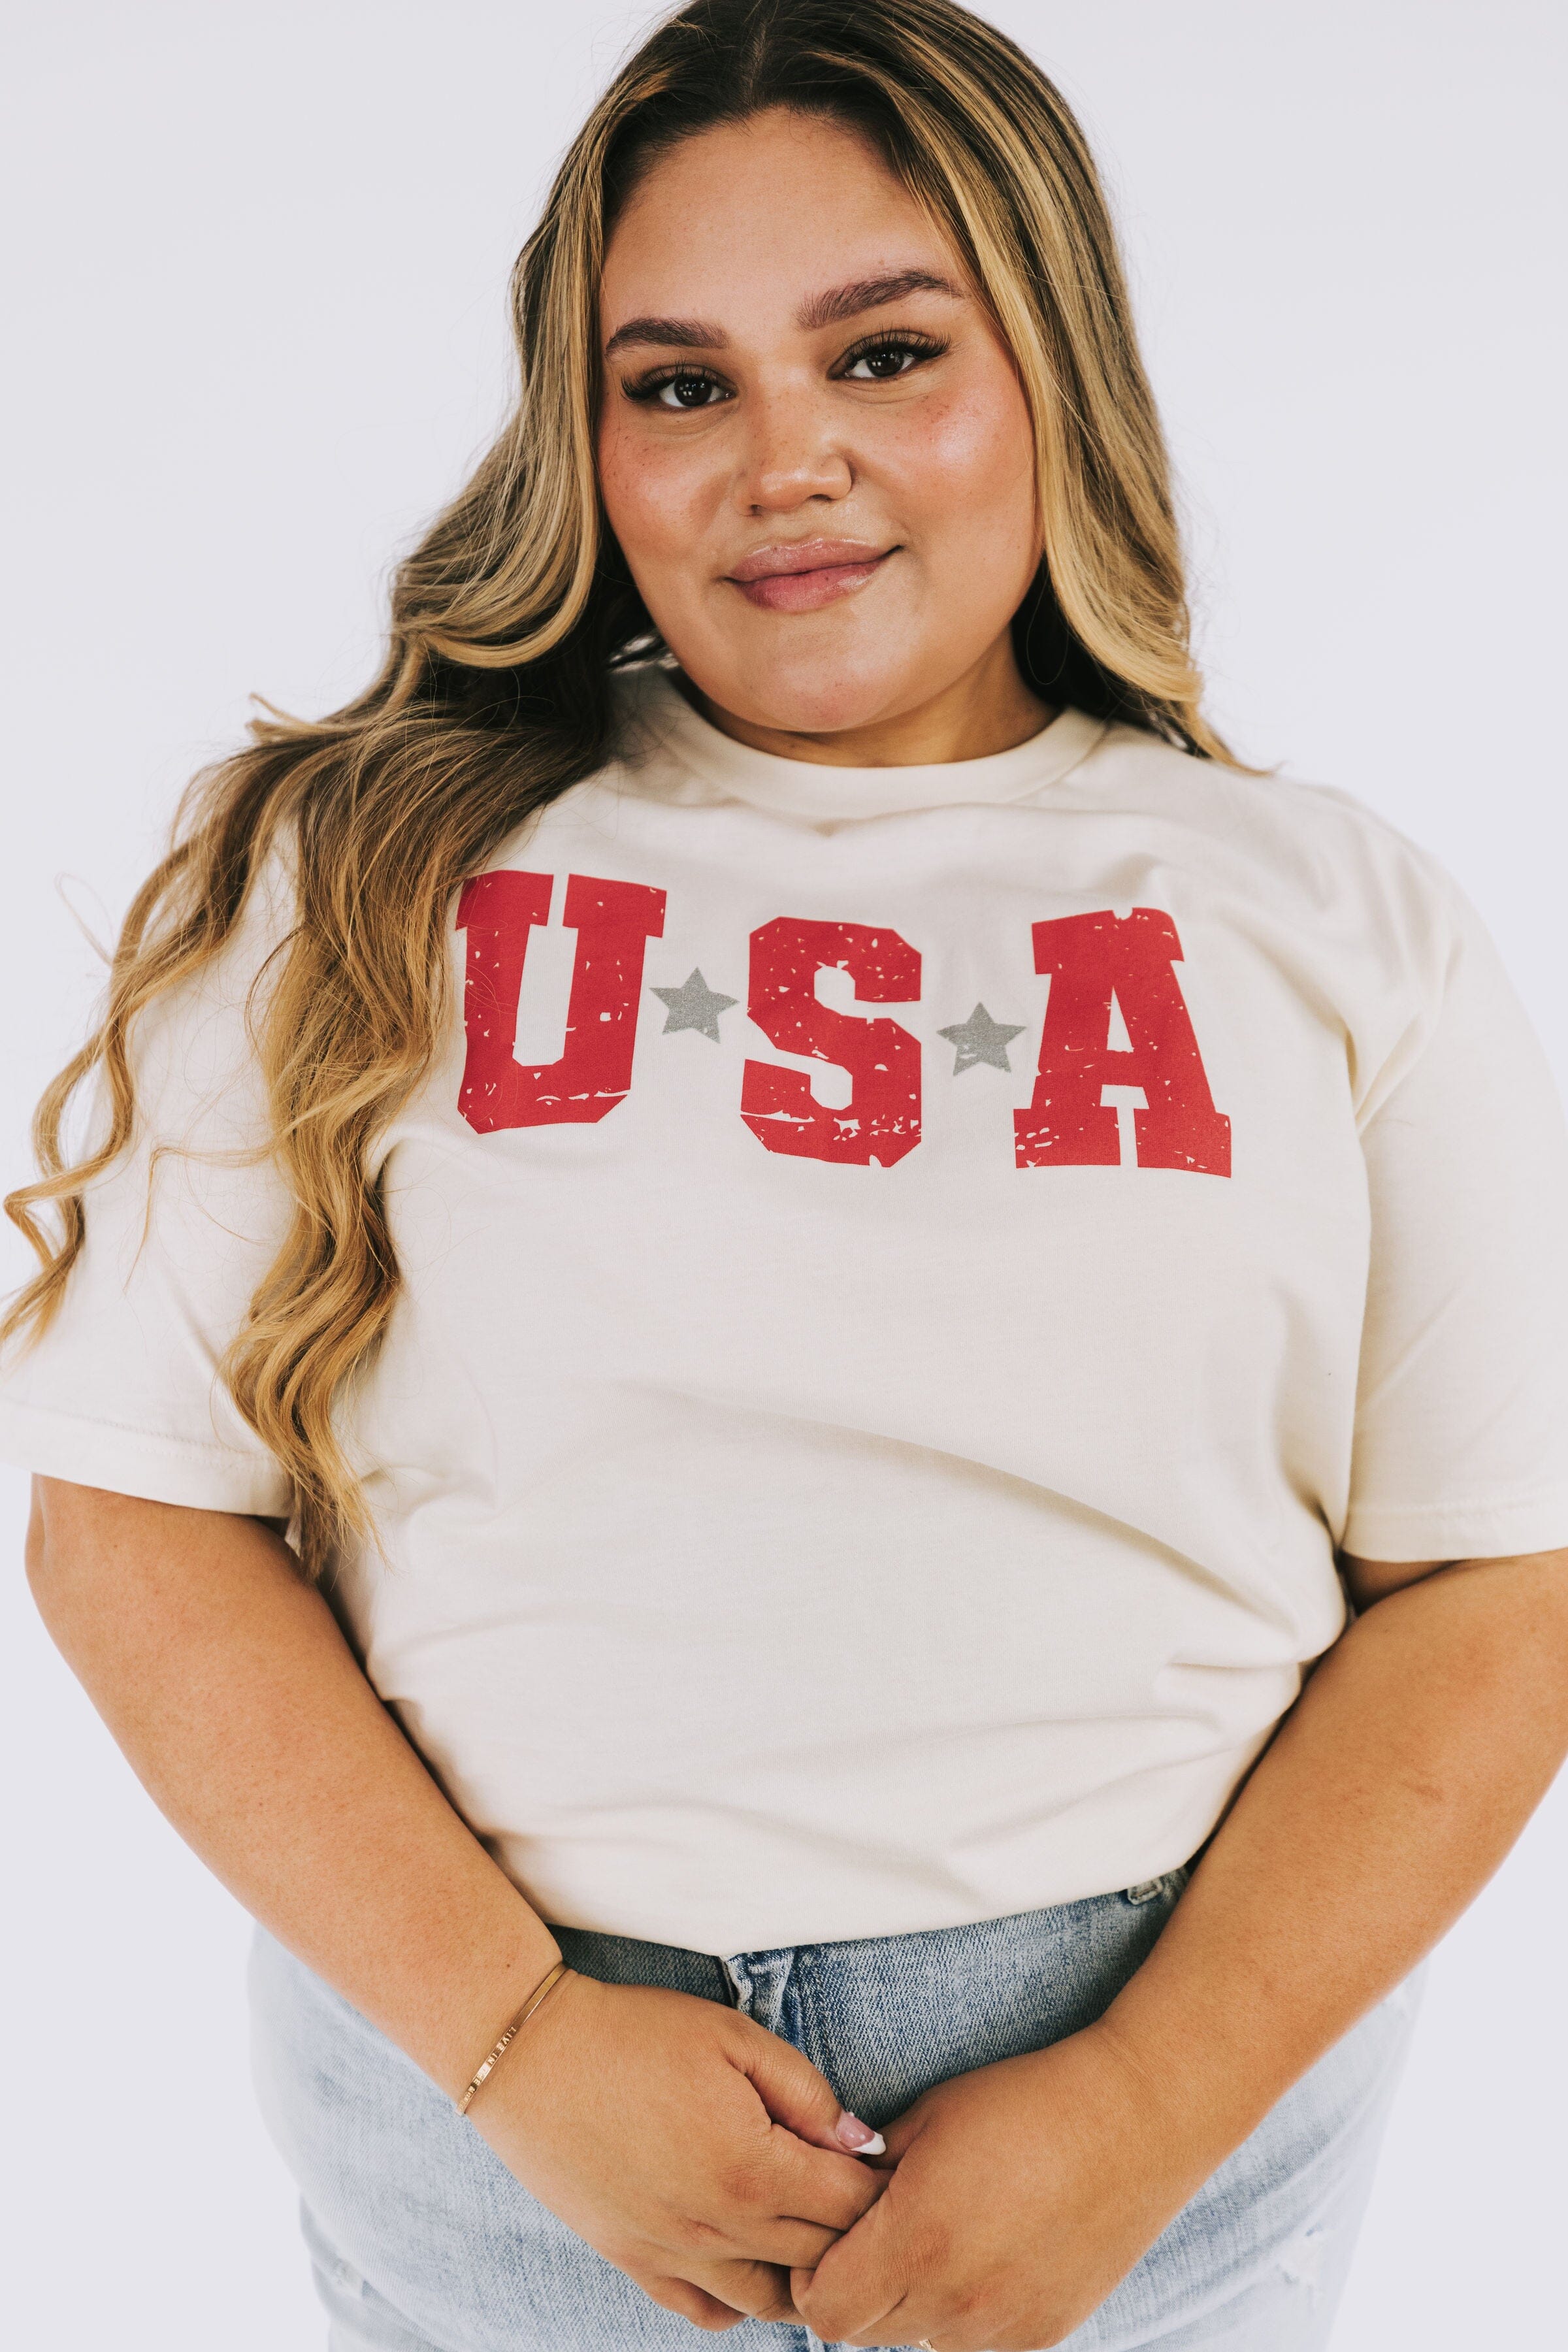 U.S.A. Tee - Extended Sizing!